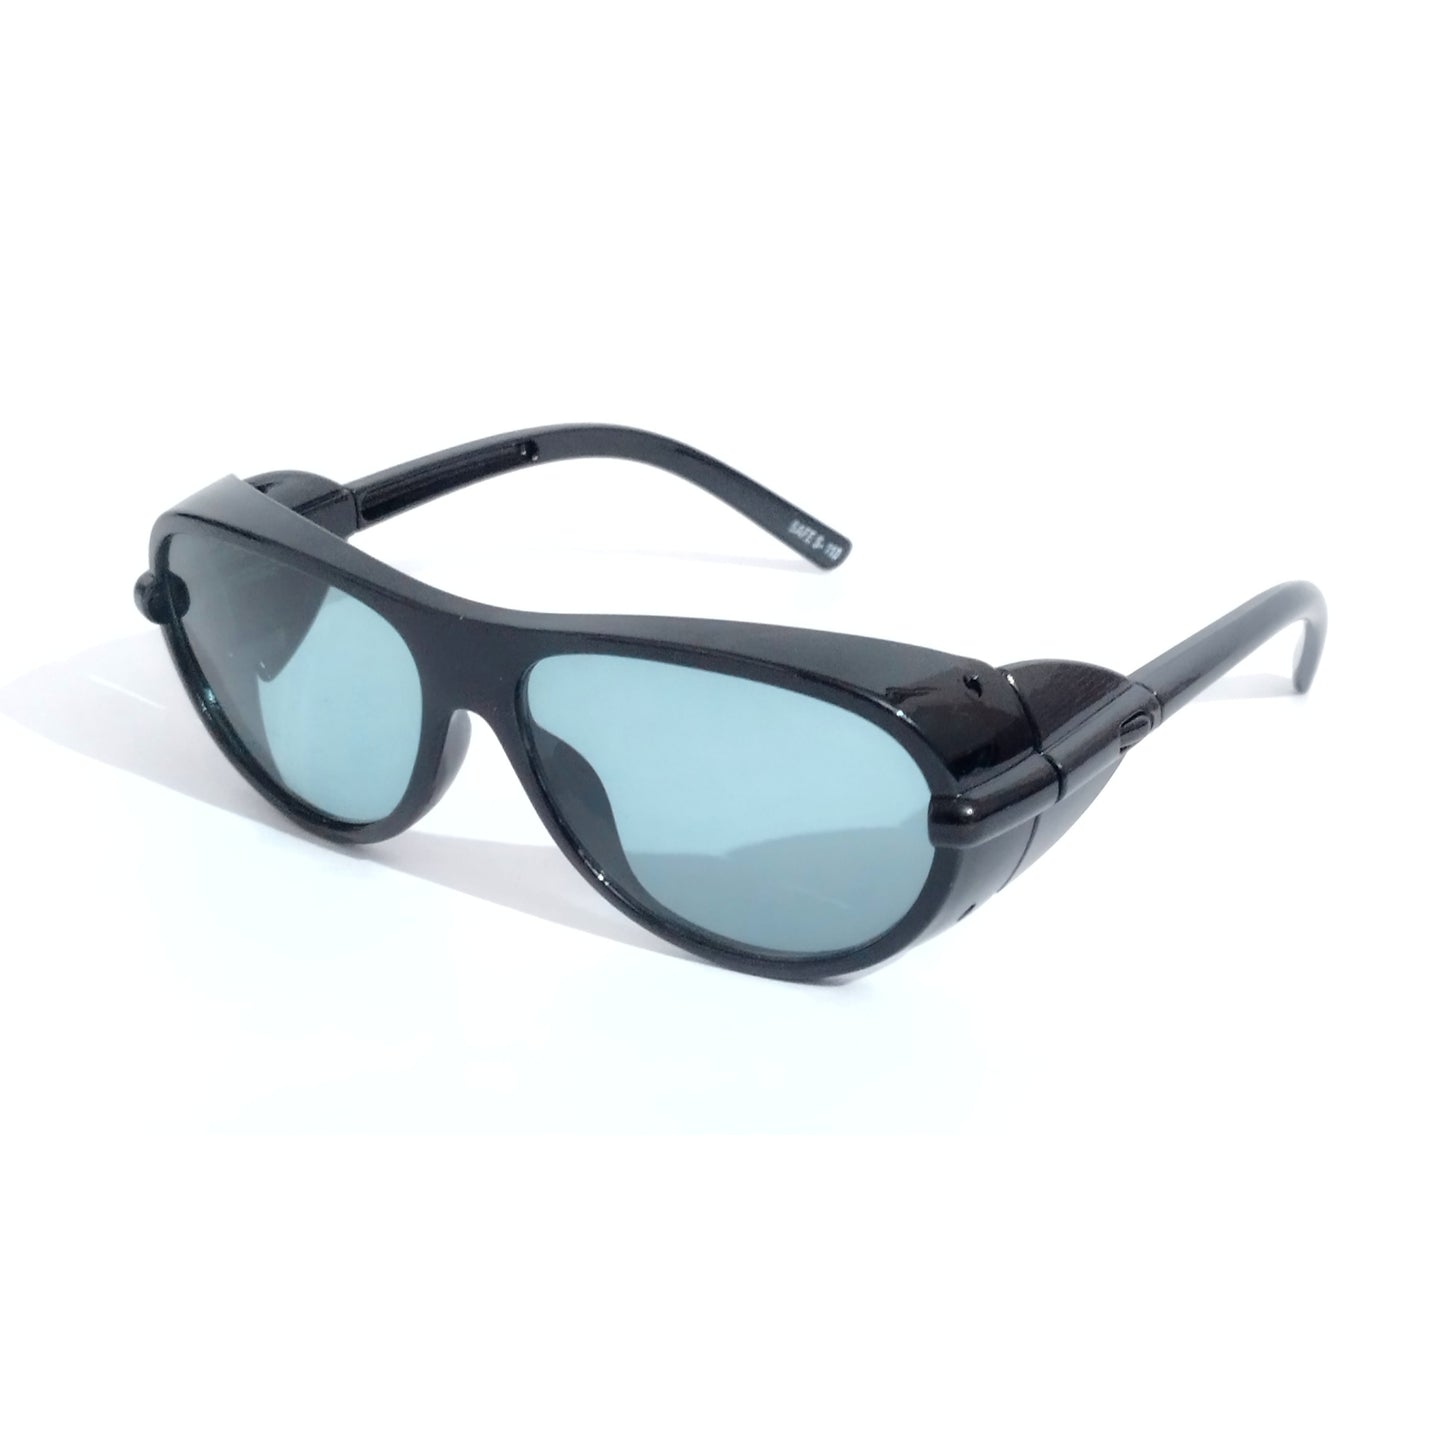 Blue Lens Sports Driving Sunglasses with Side Shield